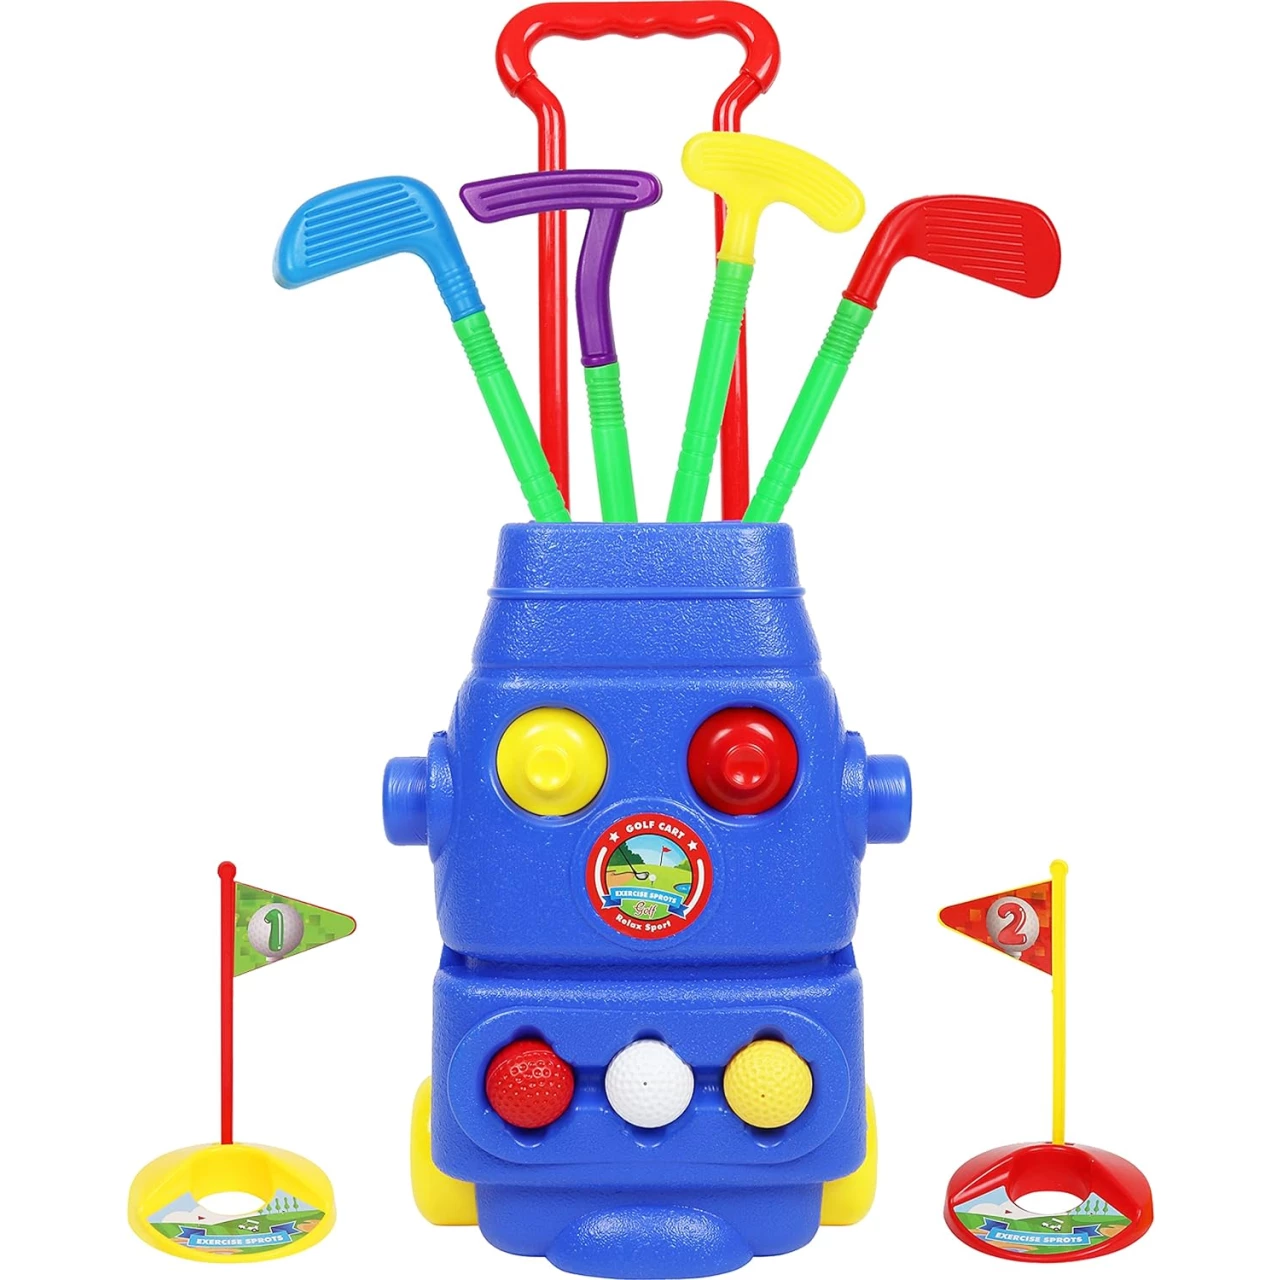 Kids Golf Set Golf Cart with Wheels | 4 Colorful Golf Clubs 3 Balls 2 Practice Holes with Flags &amp; 2 Golf Tees | Toddler Golf Set Sports Toy Kit for Boys &amp; Girls